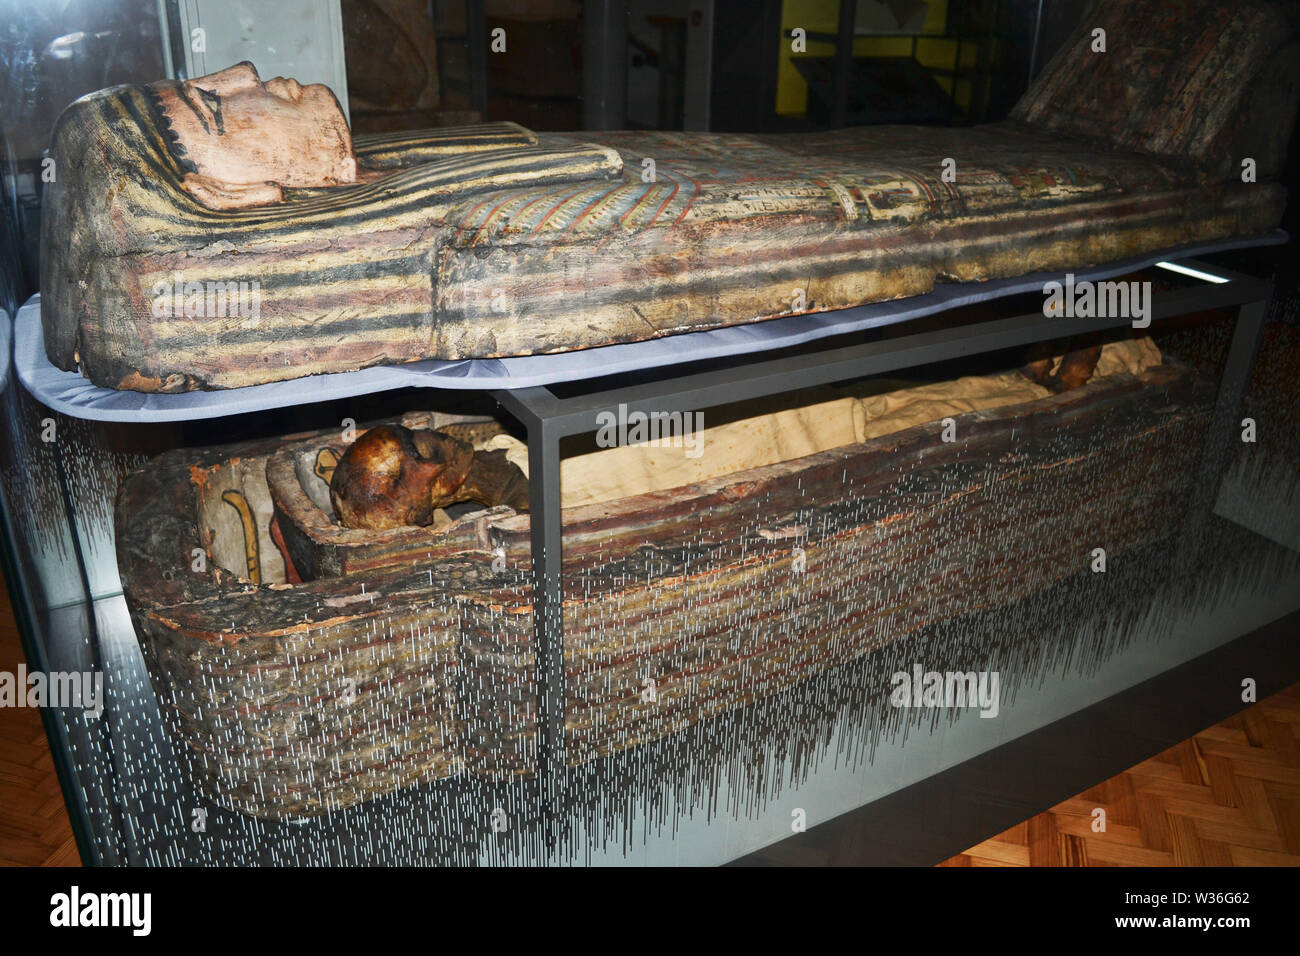 Egyptian sarcophagus with a mummy below it, in the Manchester Museum, UK. Part of the University of Manchester Stock Photo